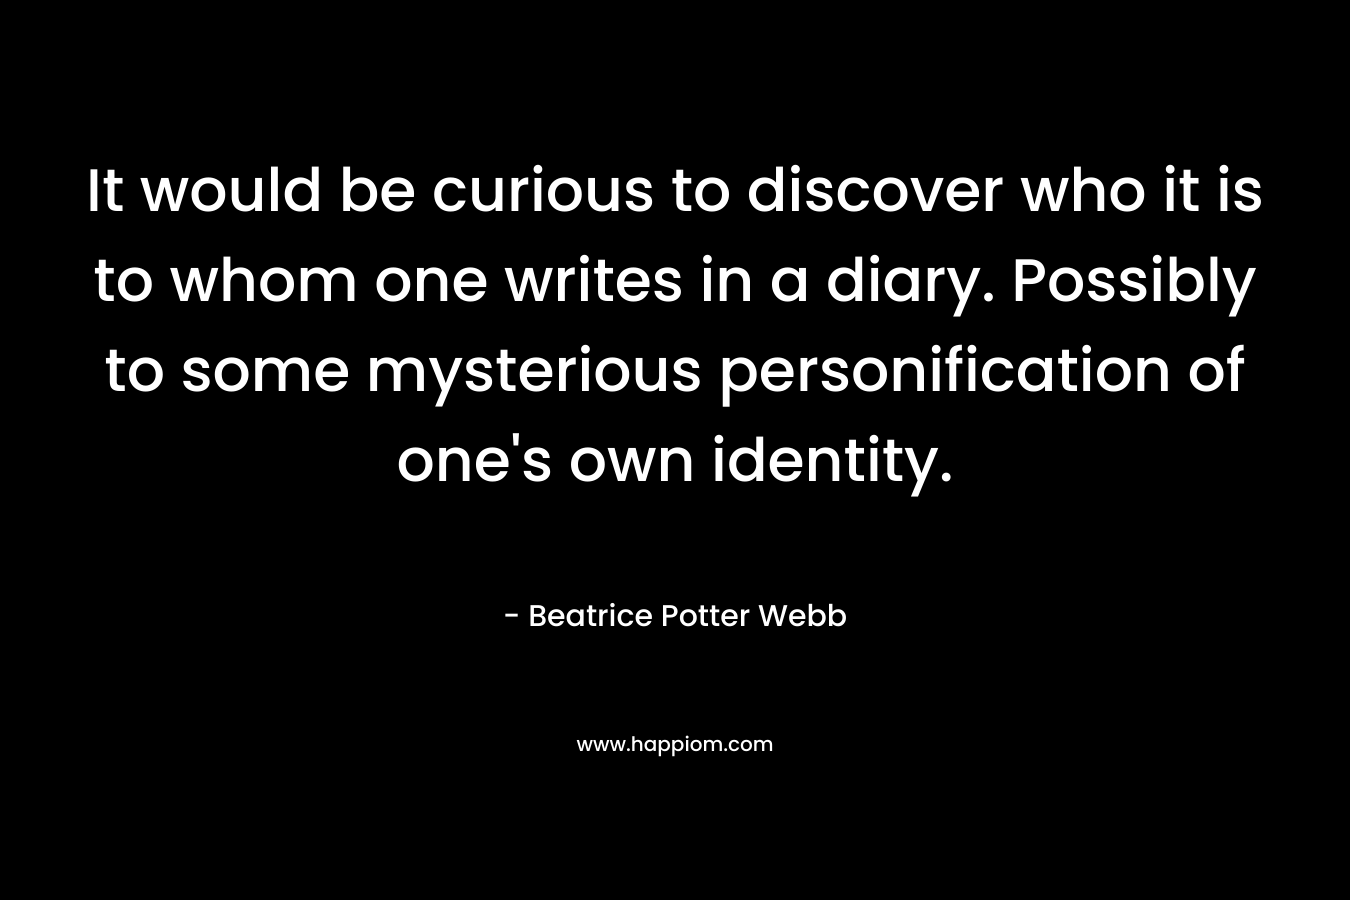 It would be curious to discover who it is to whom one writes in a diary. Possibly to some mysterious personification of one’s own identity. – Beatrice Potter Webb